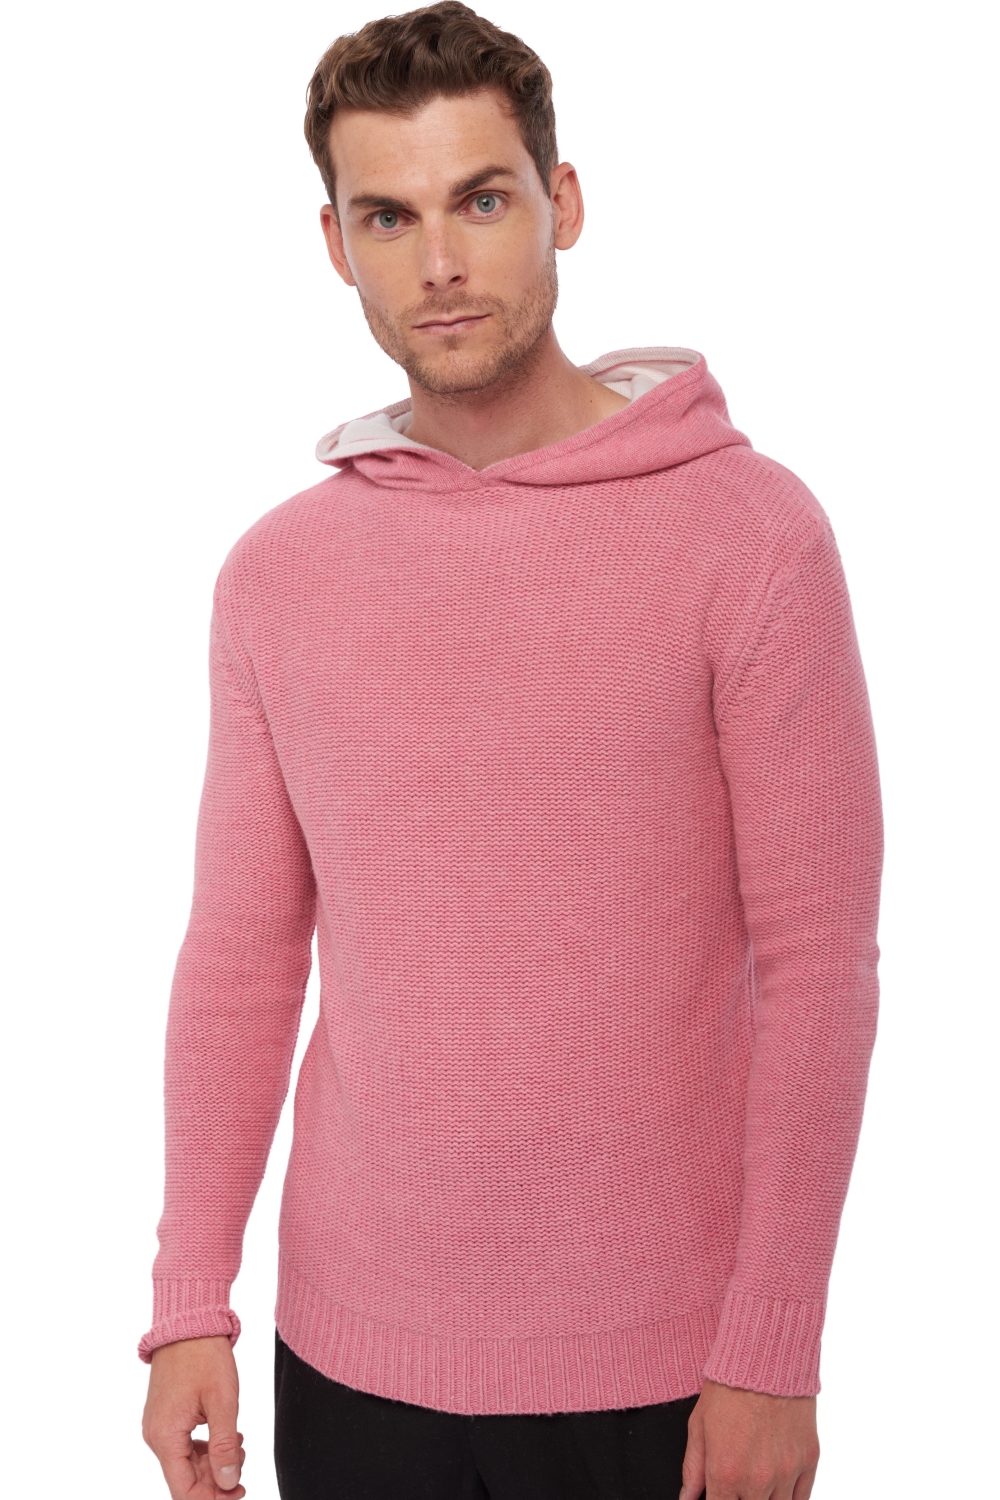 Yak yak vicuna yak for men conor pink off white 4xl